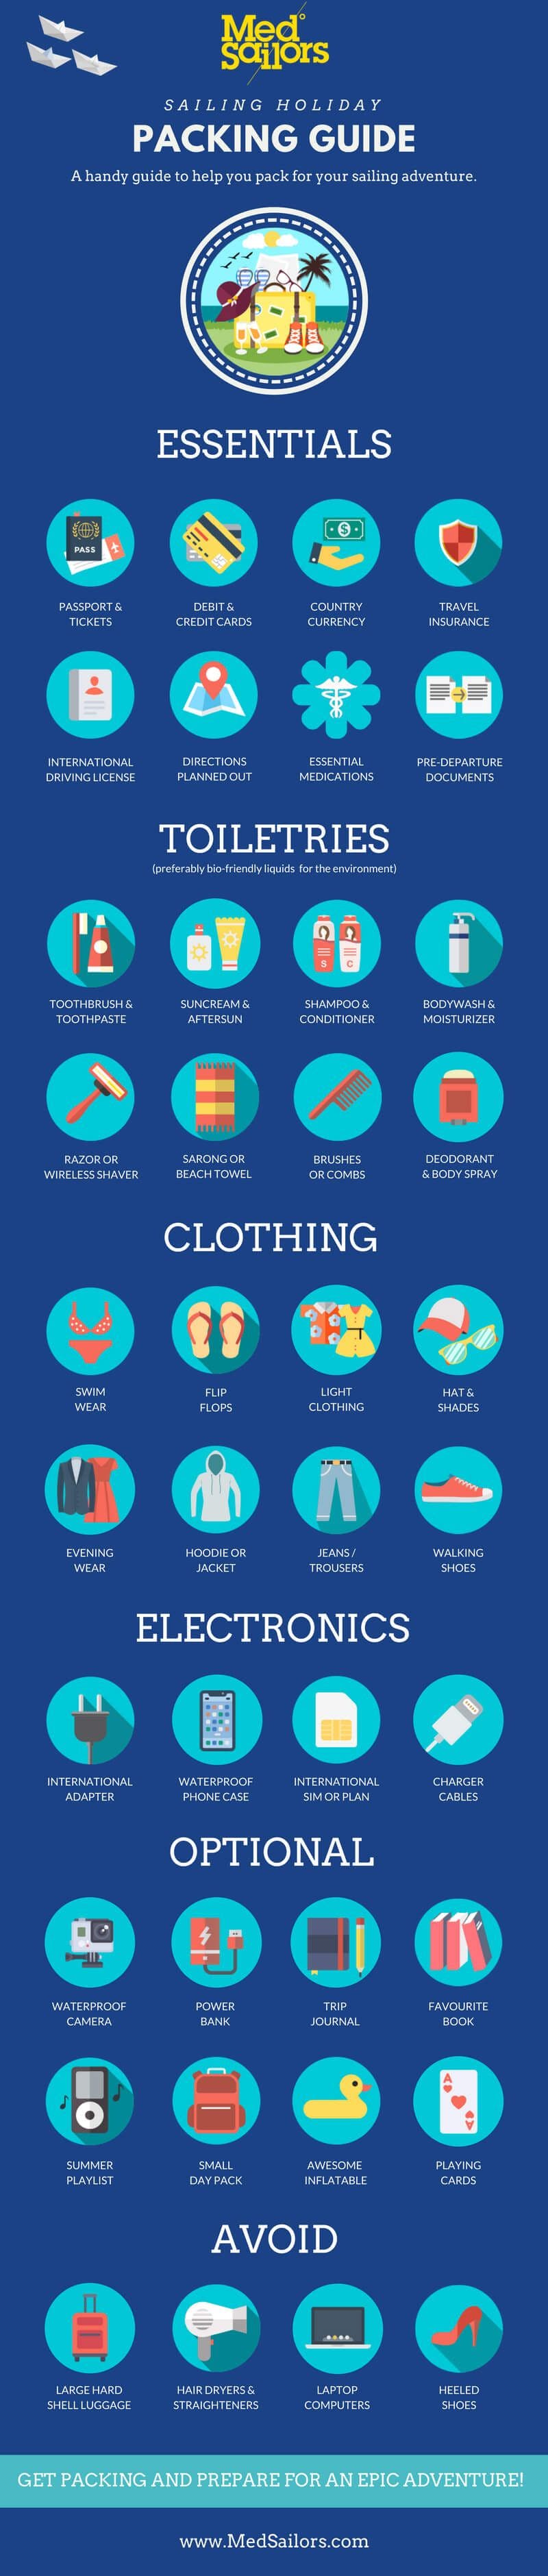 Packing guide for sailing holidays in Greece, Croatia, Italy or Turkey. Infograph designed by Ryan Brown of Lost Boy Memoirs